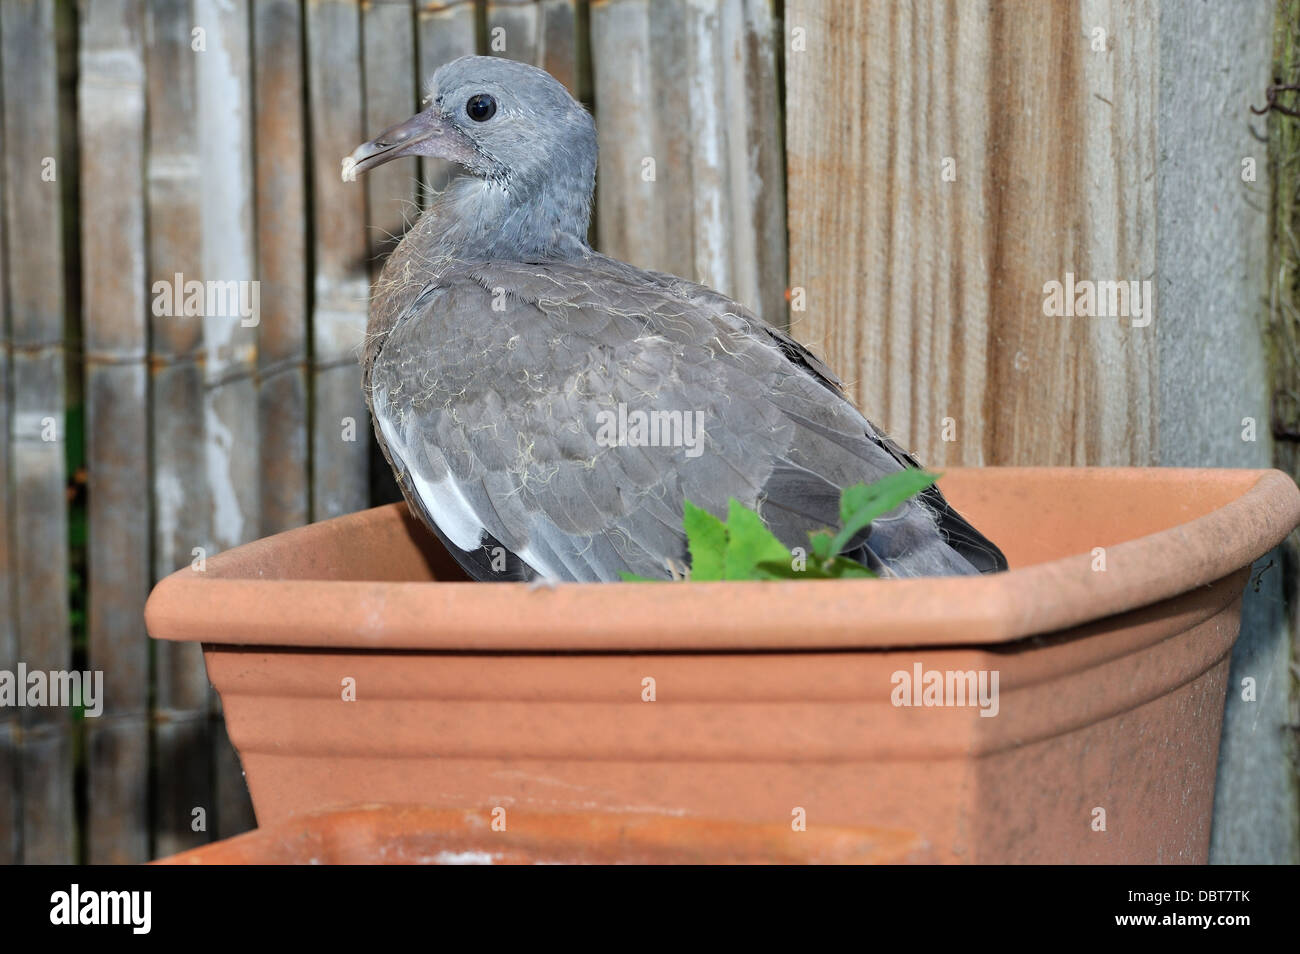 Baby Pigeon in plant pot Stock Photo